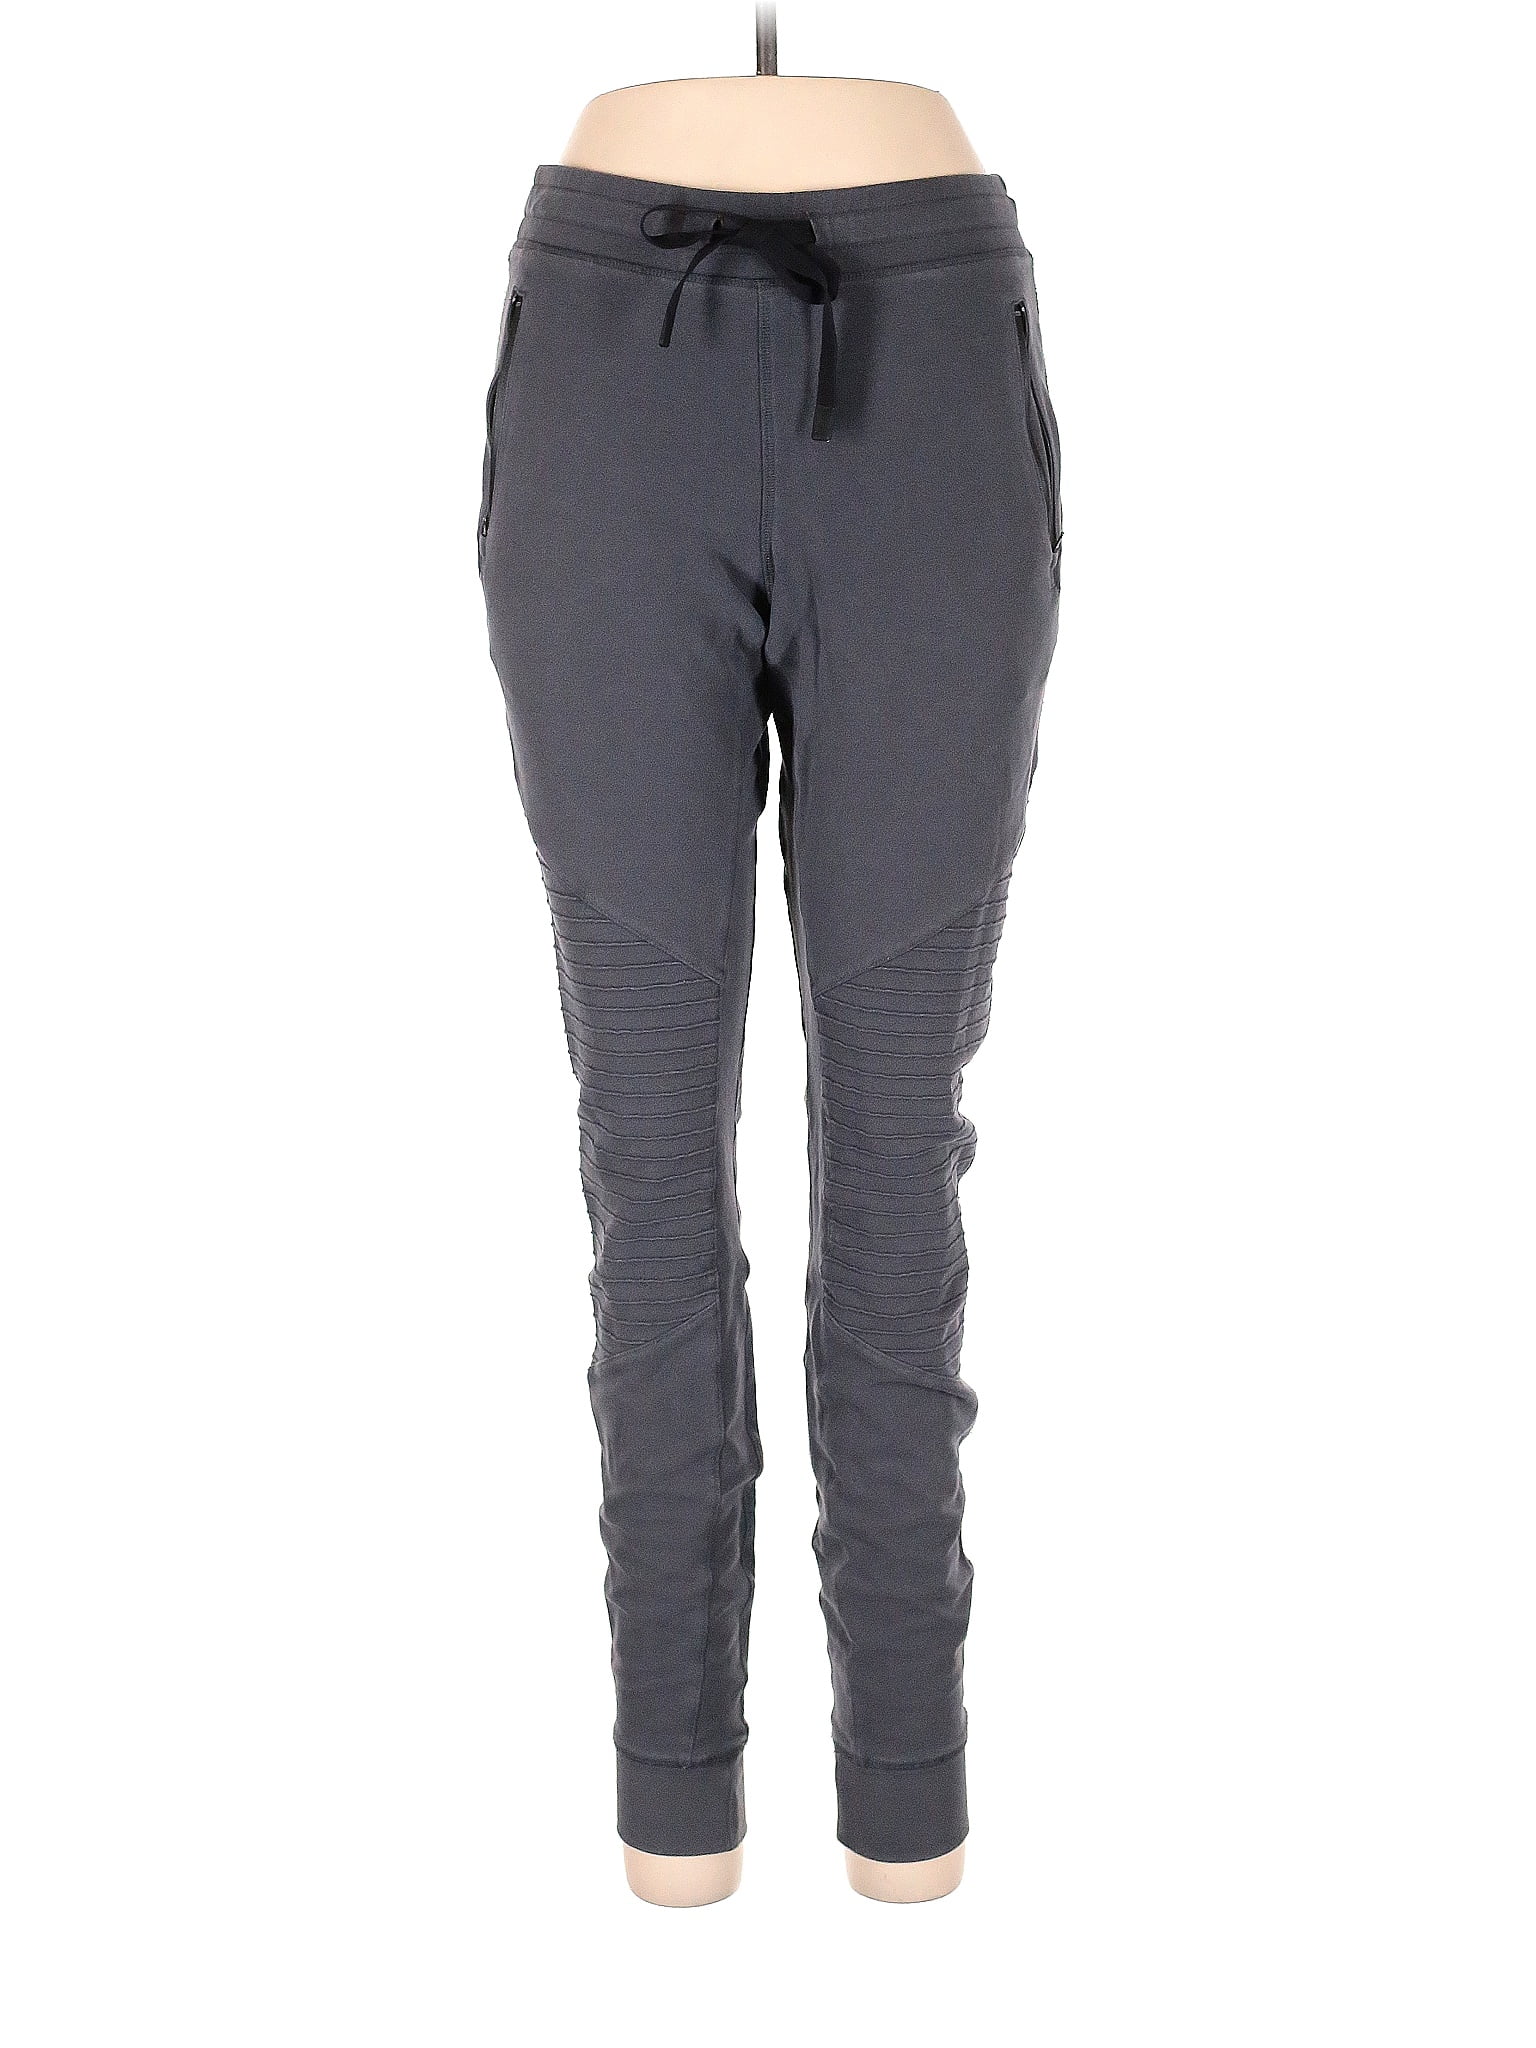 Alo Yoga Cargo Jogger Gray Size M - $63 (50% Off Retail) - From